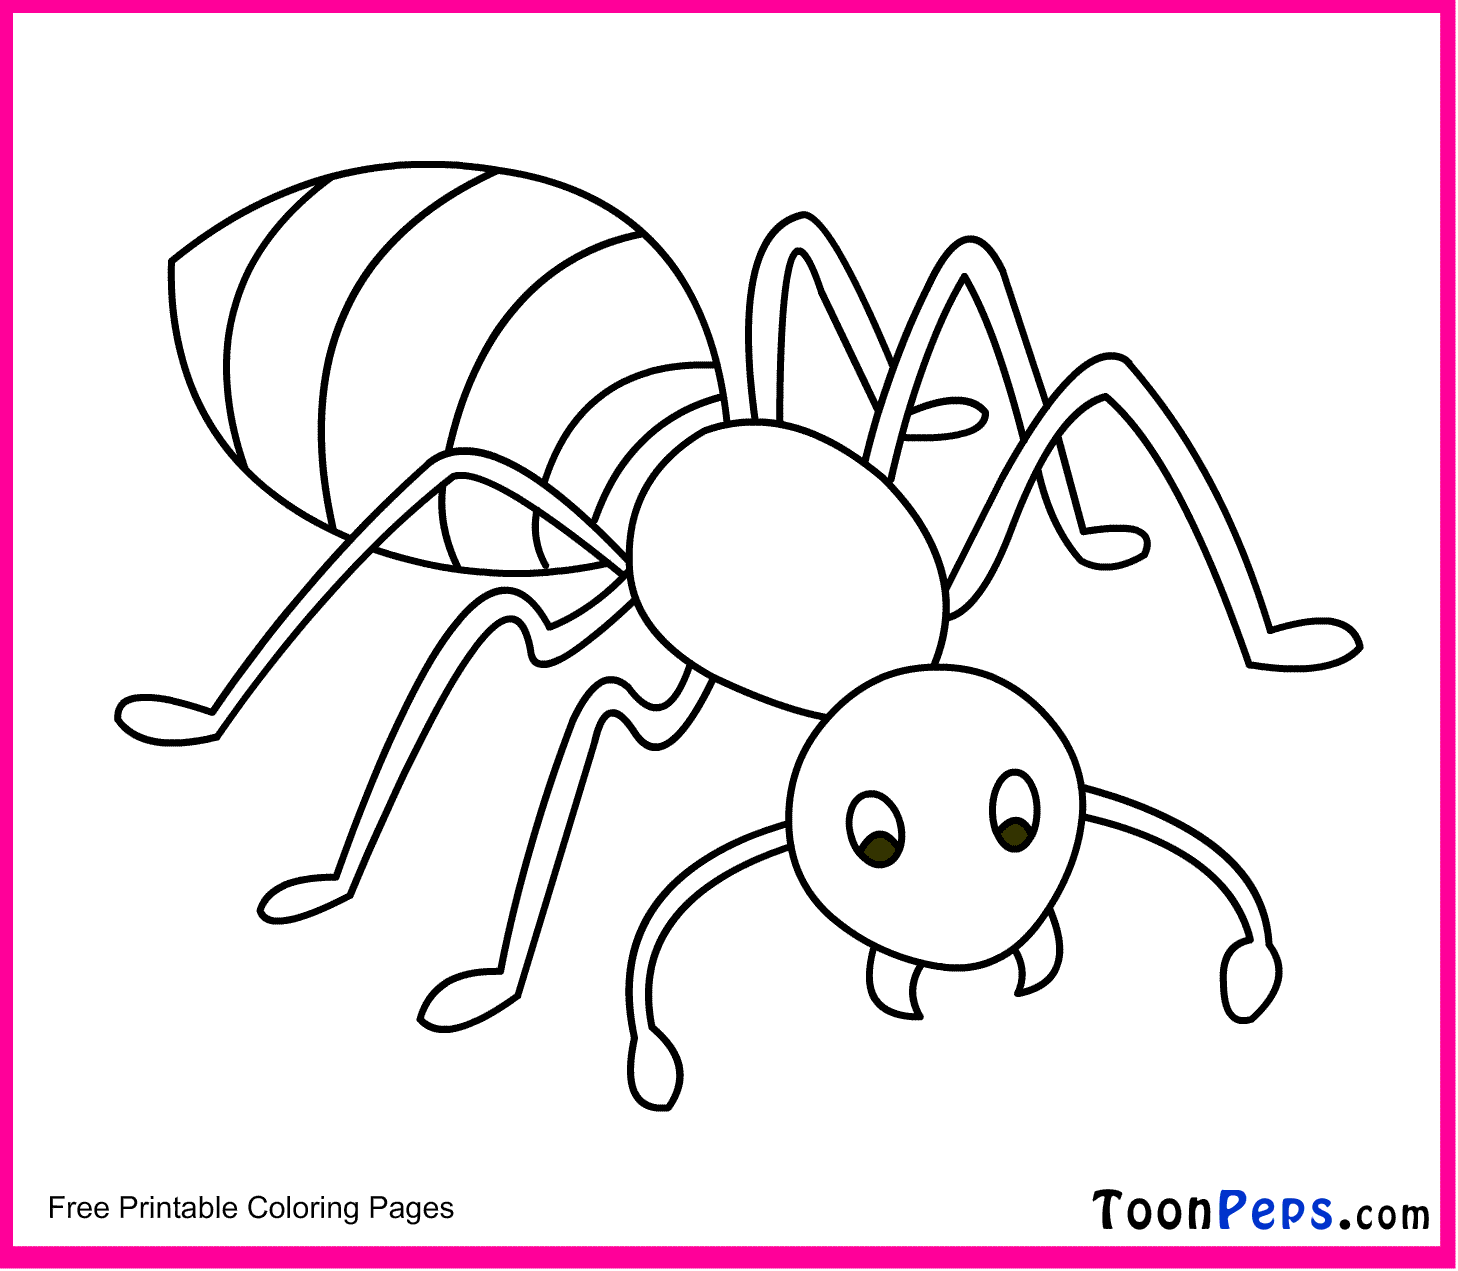 Toonpeps Free Printable Ant Coloring Pages For Kids Coloring Home